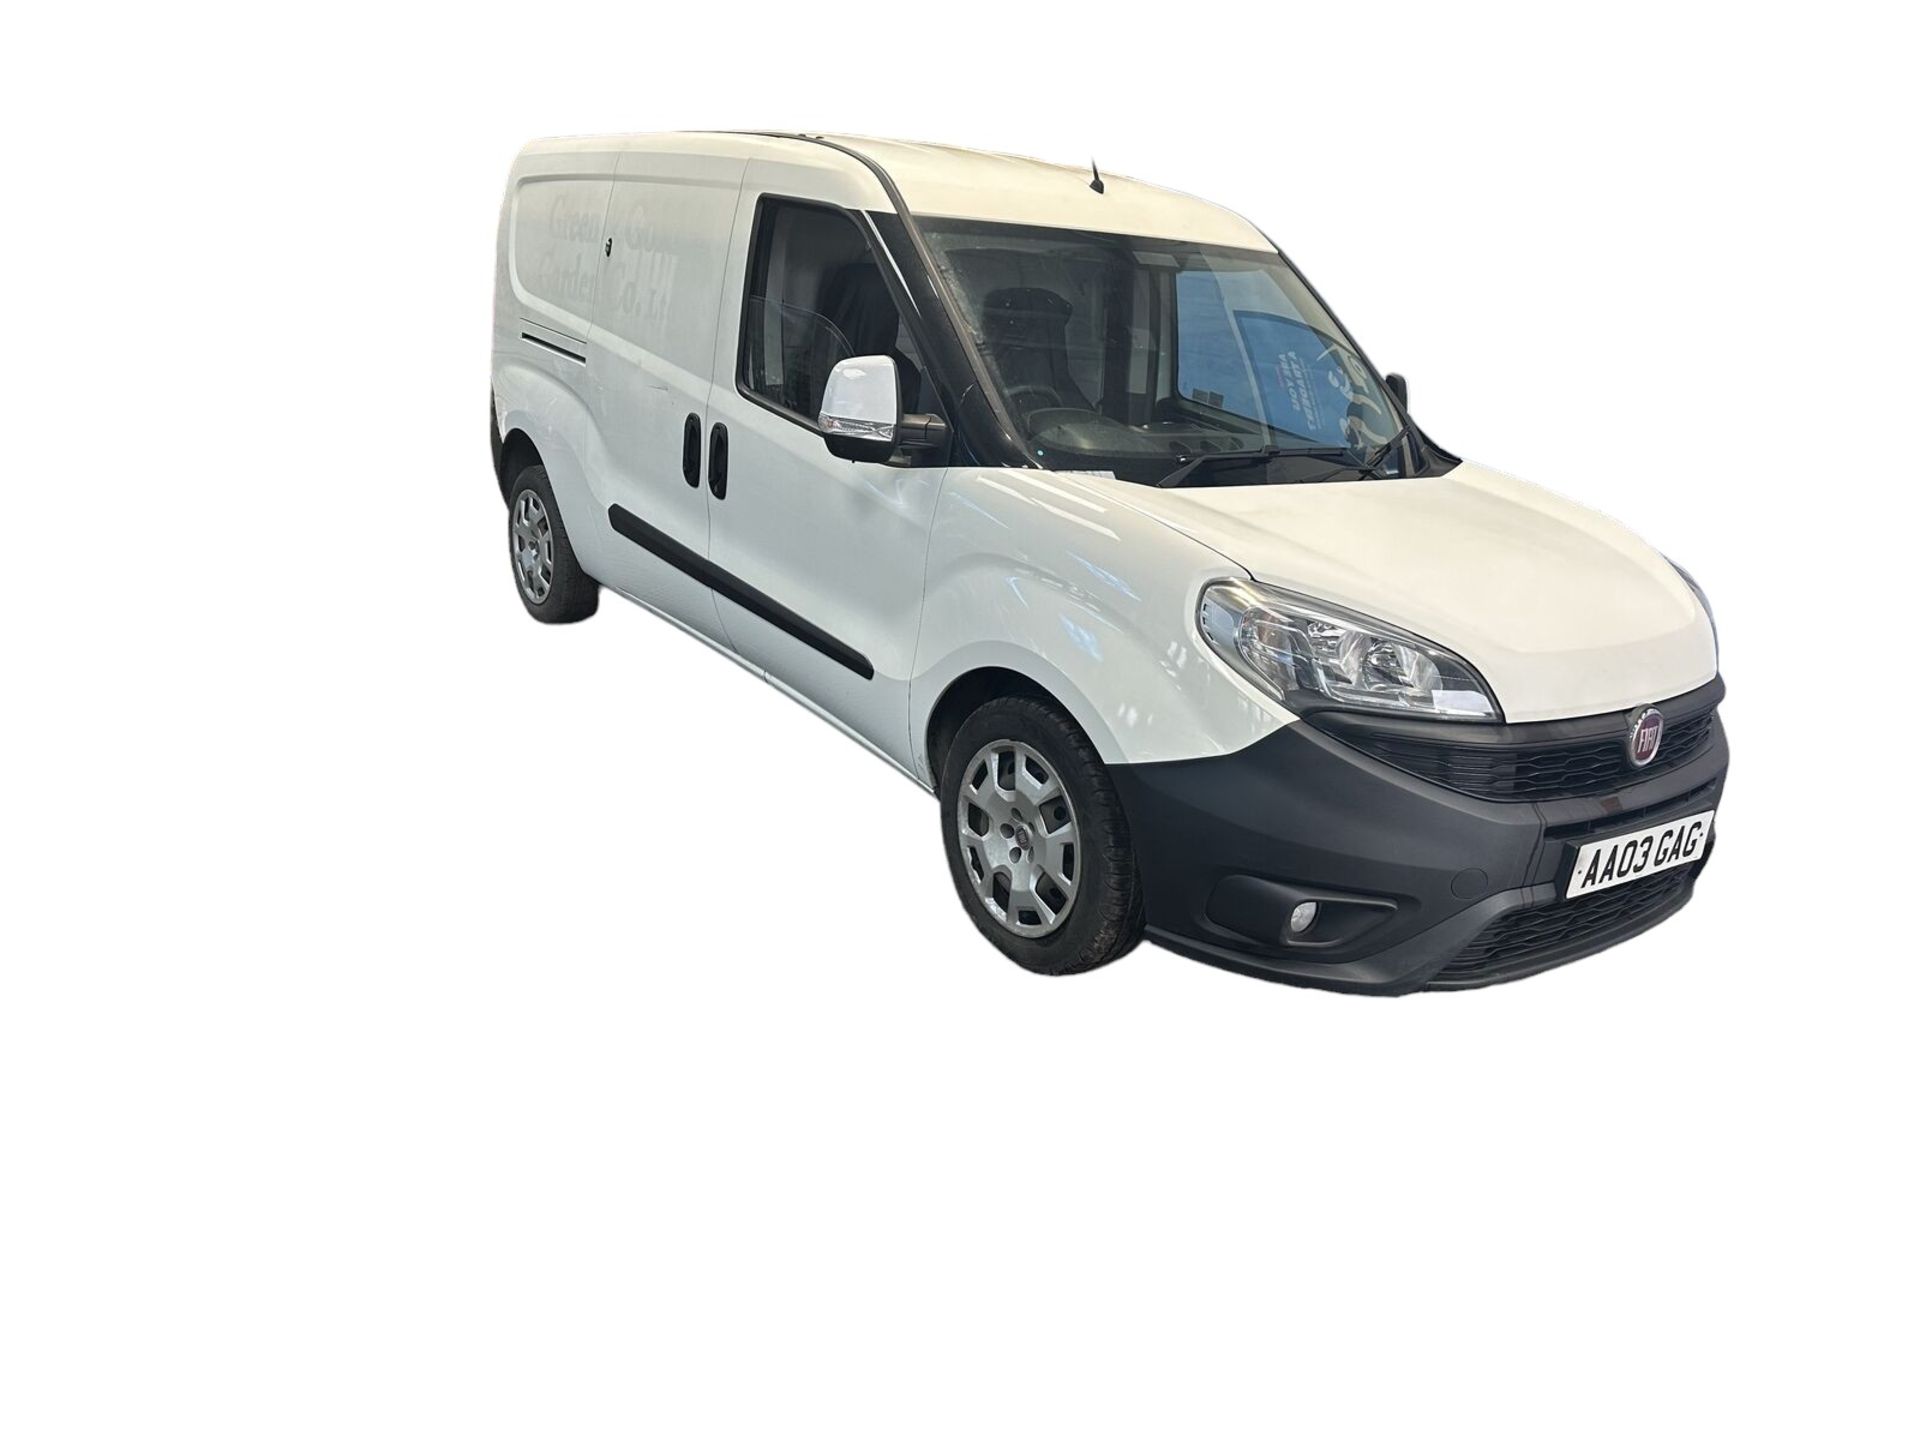 READY FOR DUTY: 2018 FIAT DOBLO - LOW MILES, RELIABLE WORK VAN